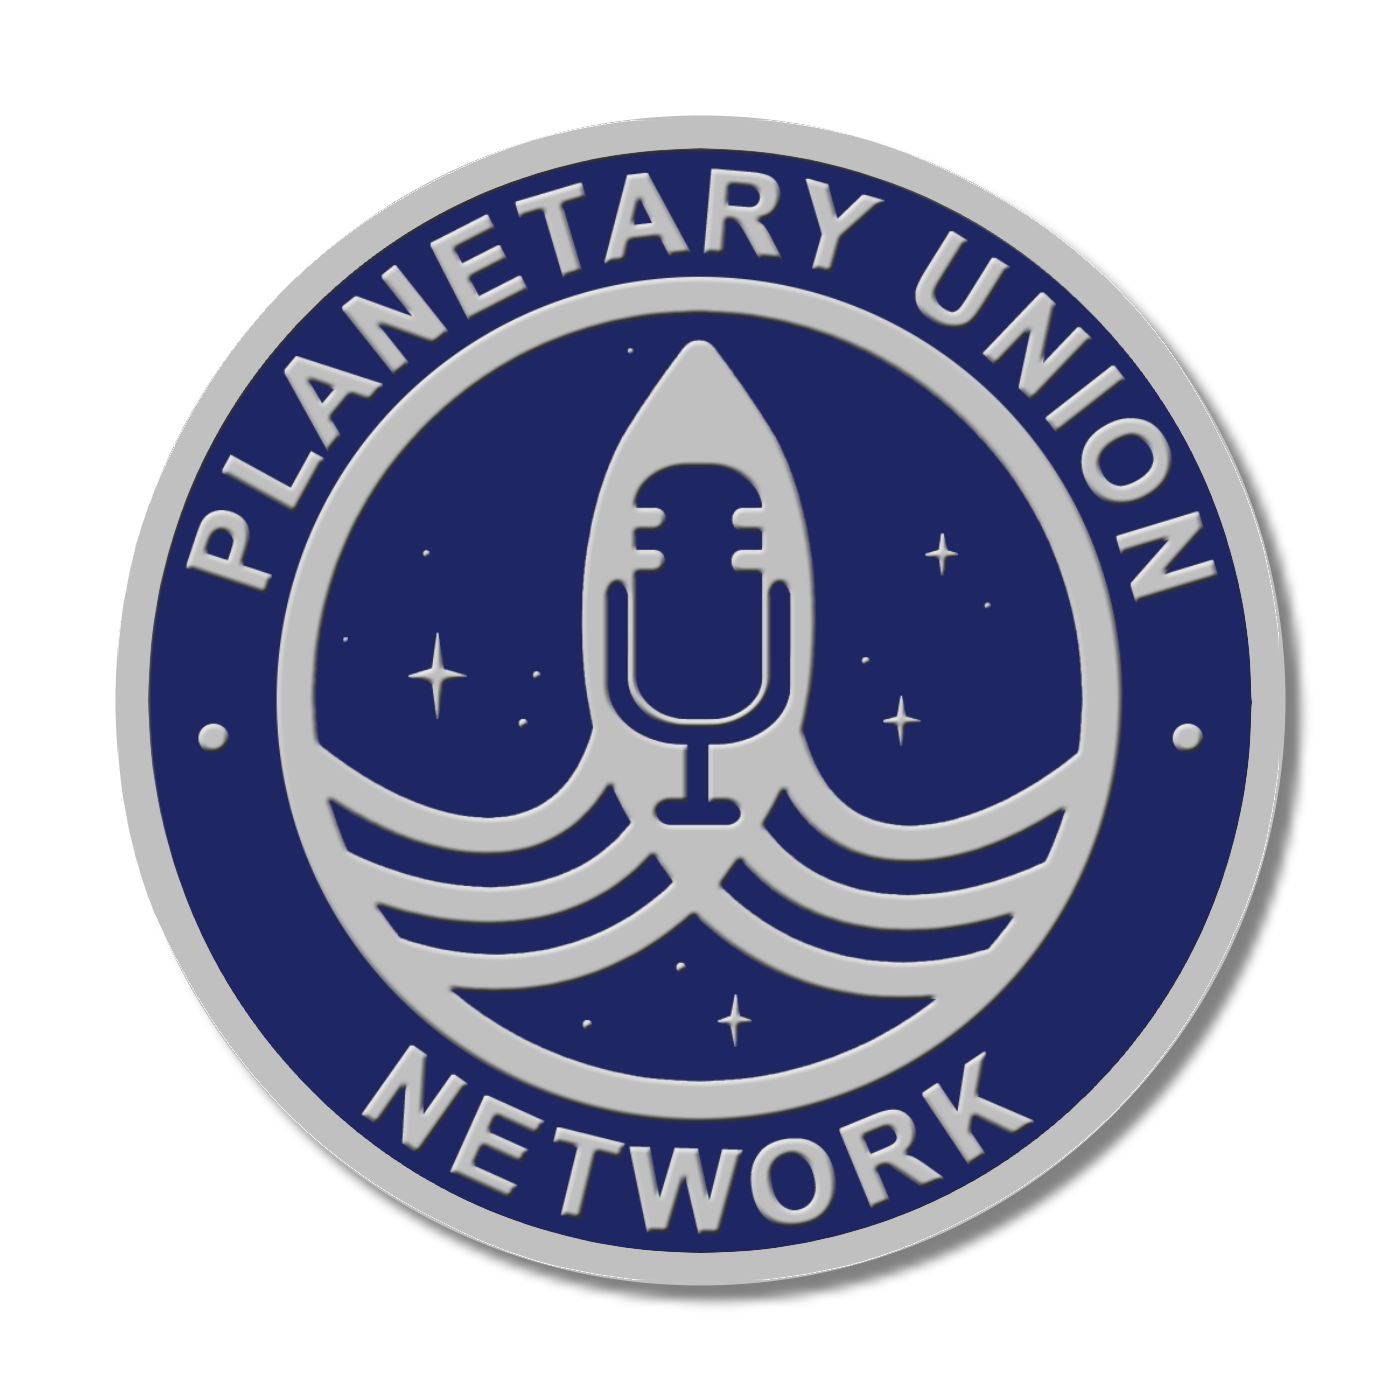 Artwork for podcast Planetary Union Network: The Orville Official Podcast